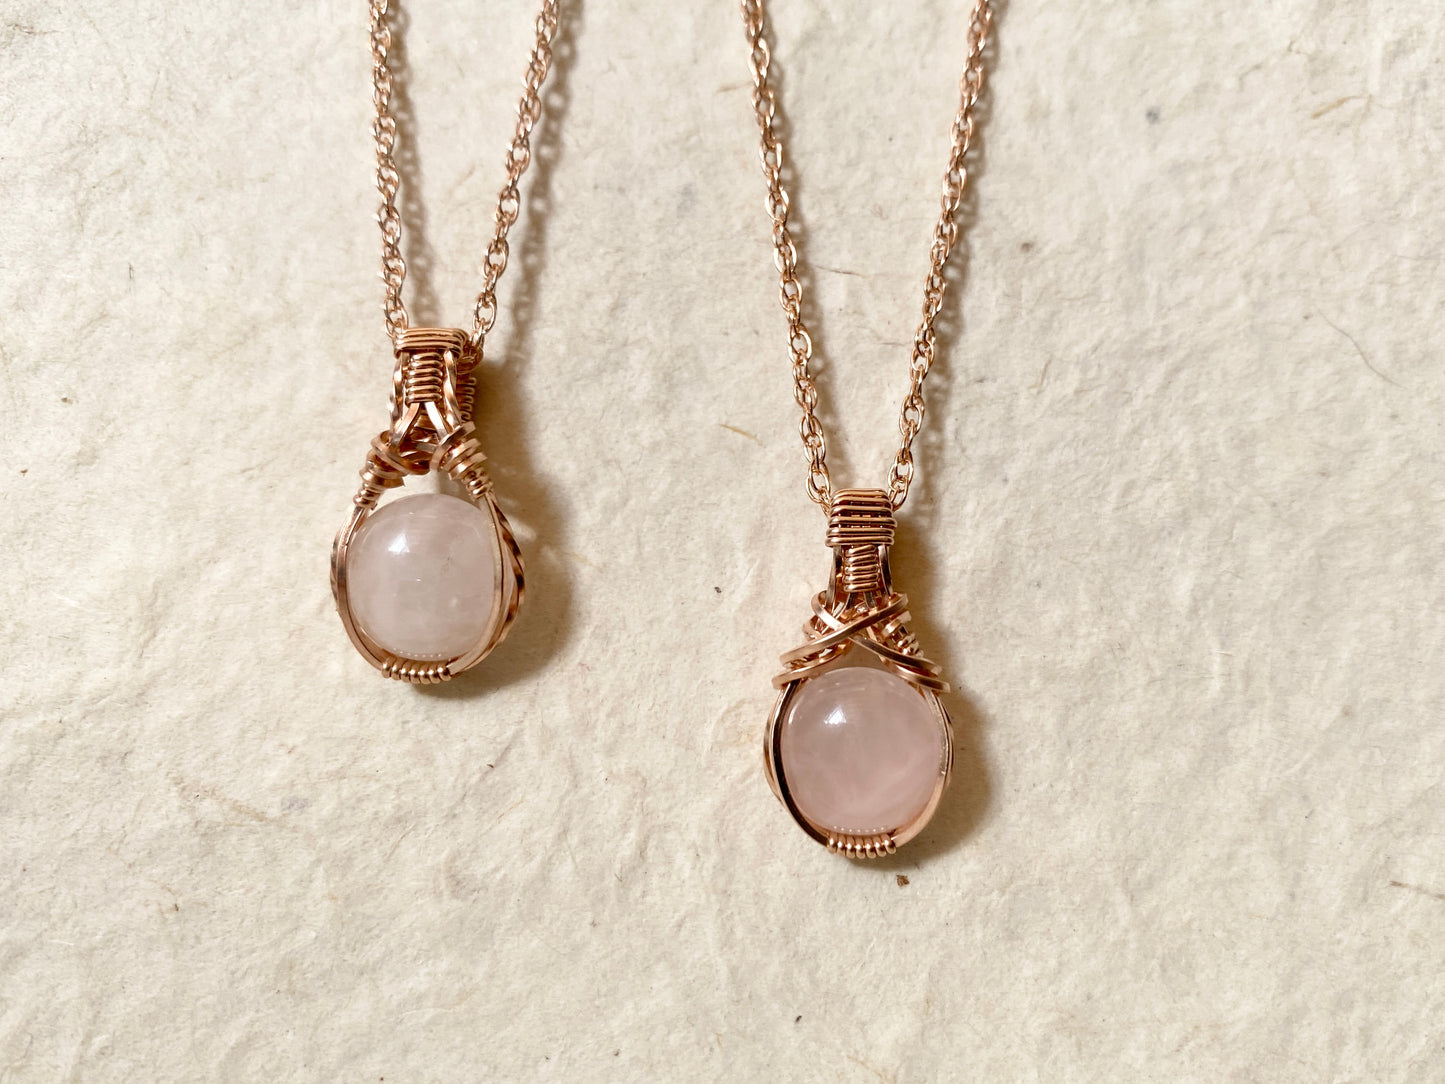 Rose Quartz Wrapped in Sterling Silver or Rose Gold - Chain included